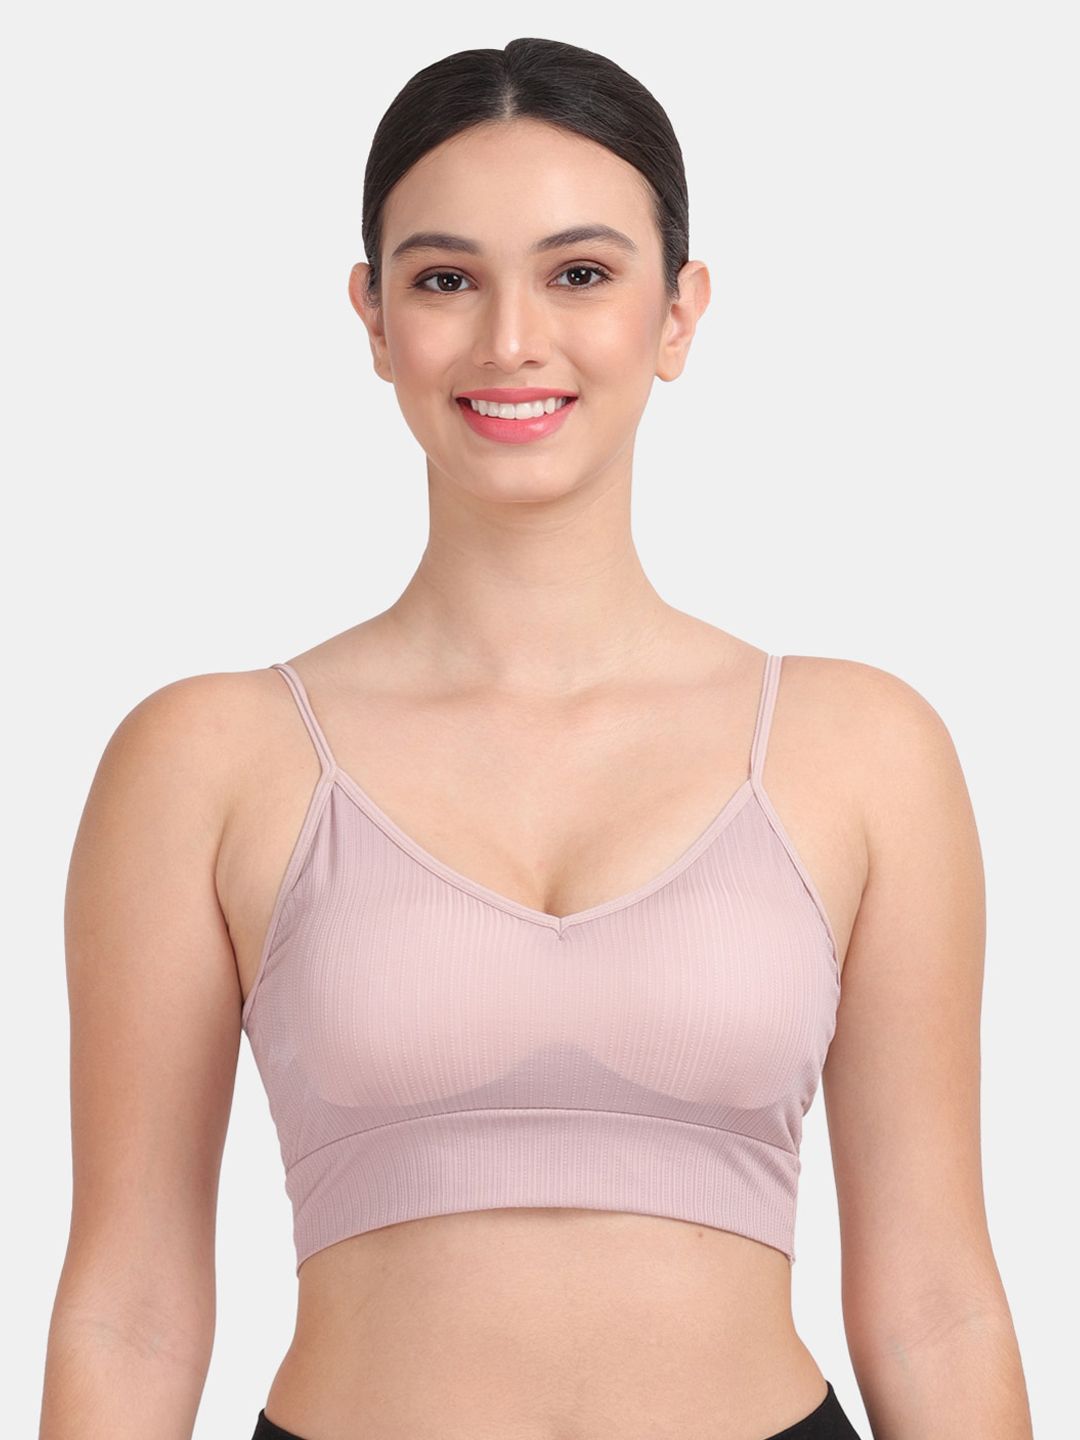 Amour Secret Peach-Coloured Moisture Wicking Dry-Fit Sports Bra - Lightly Padded Price in India